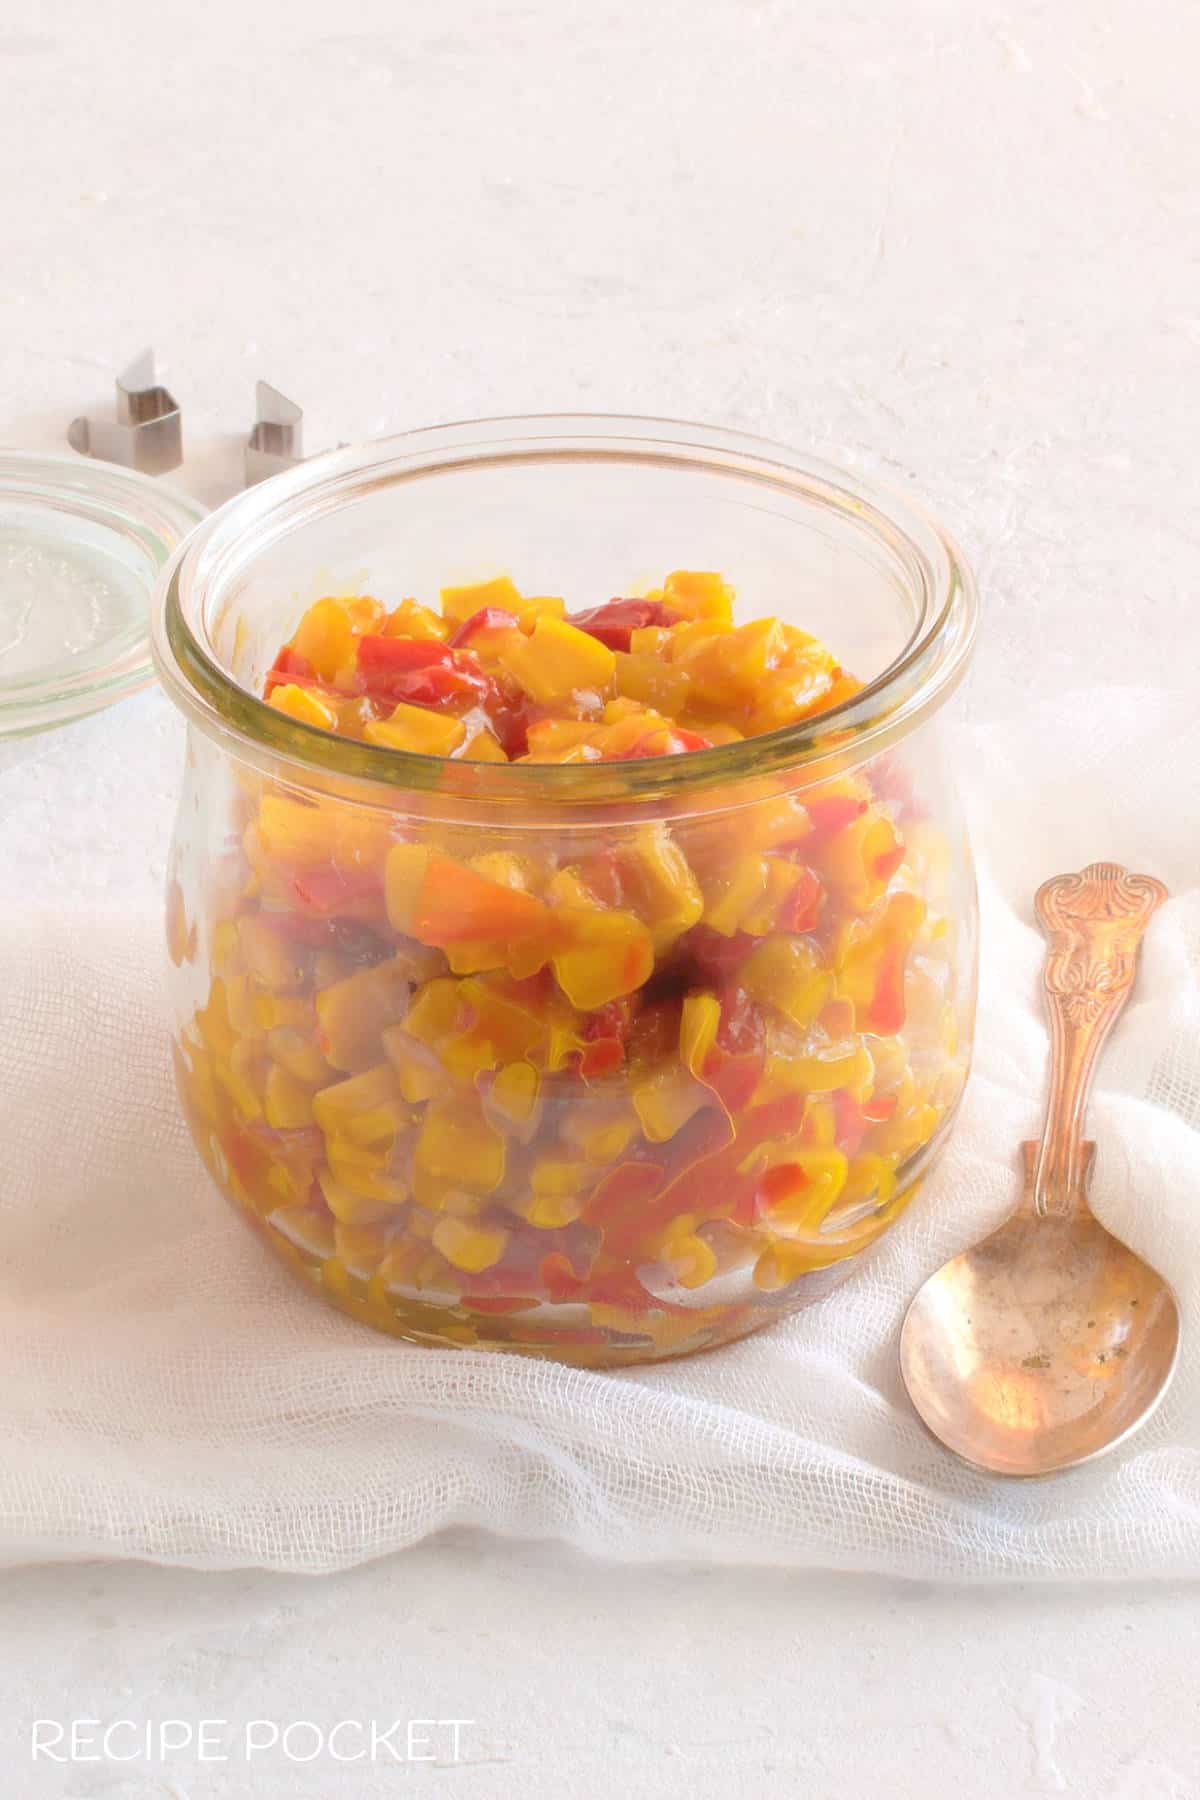 Corn relish in a glass jar with a spoon.